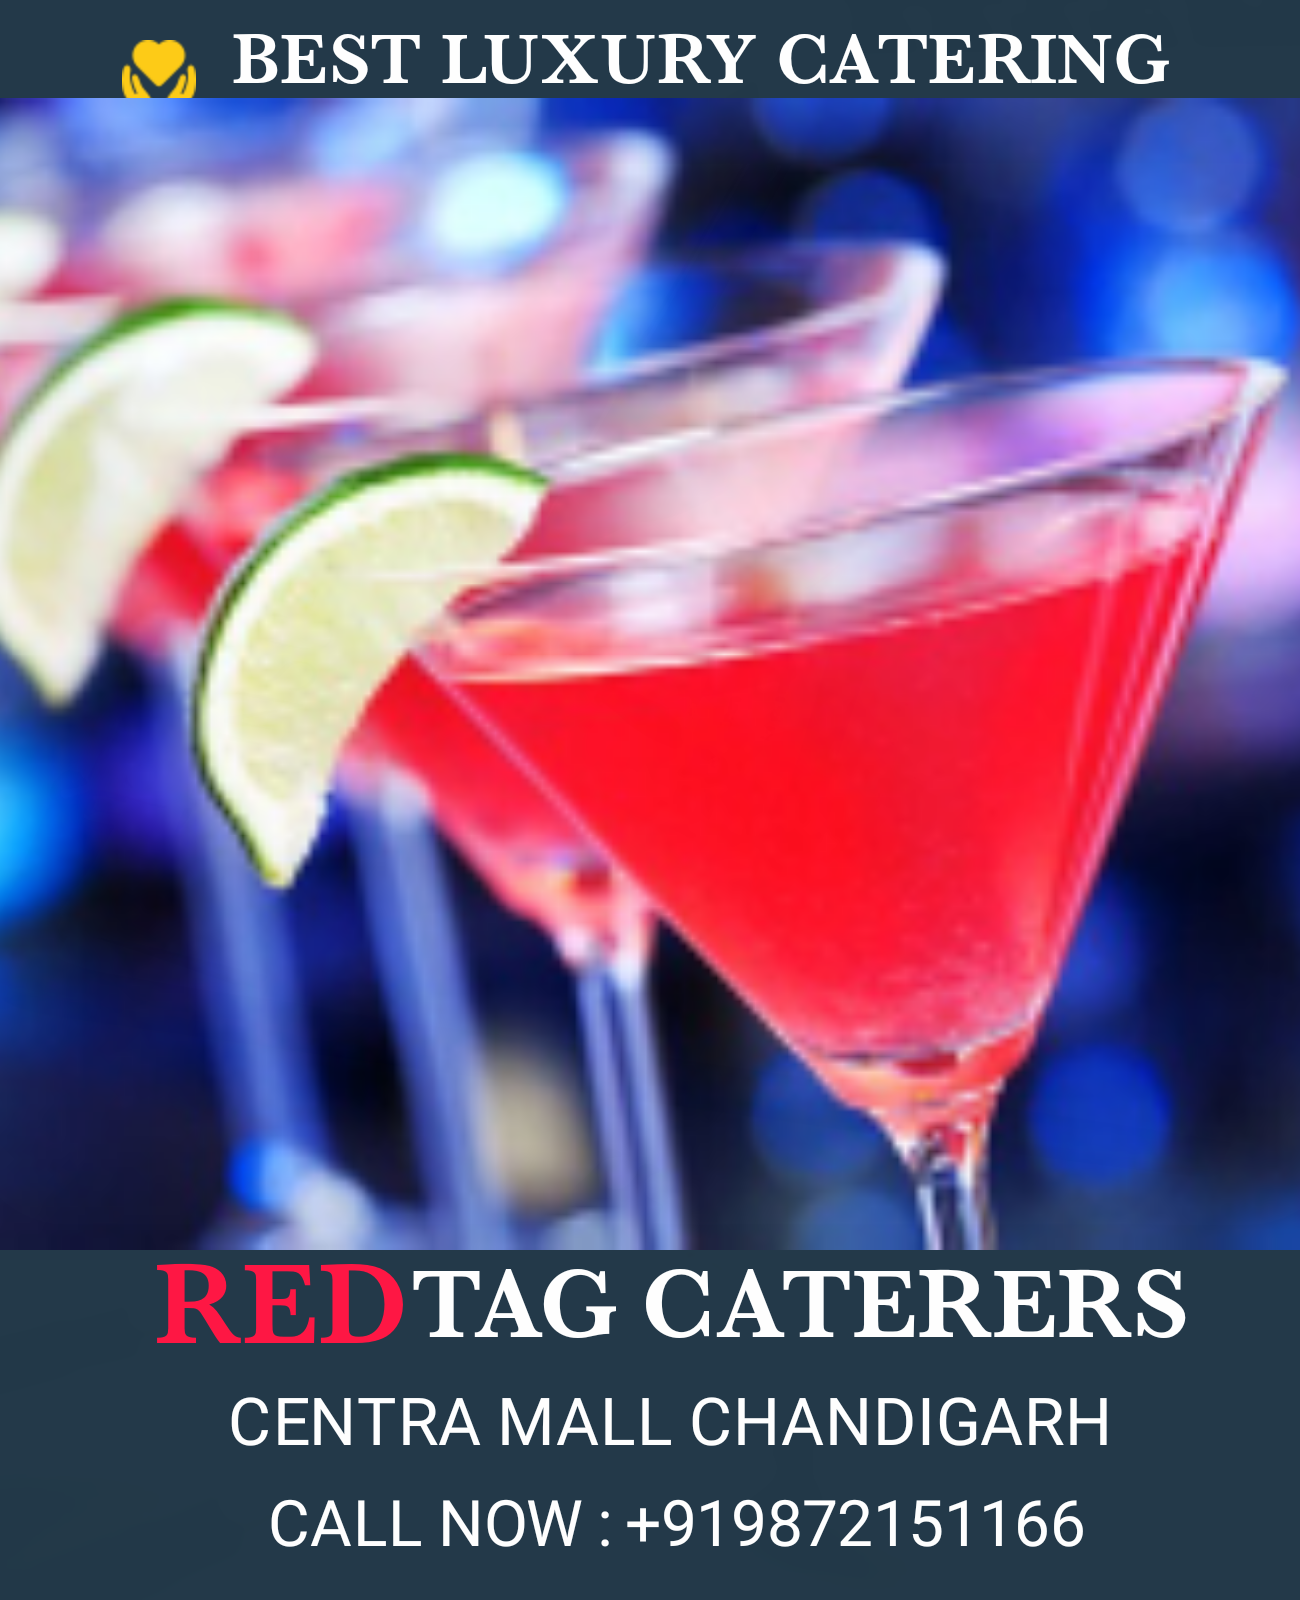 BEST CATERING SERVICE IN ZIRAKPUR | Red Tag Caterers | best catering service in zirakpur, best wedding catering services in zirakpur, best hygienic catering service in zirkpur, top catering service in zirkpur, best VIP catering service in zirakpur - GL46648